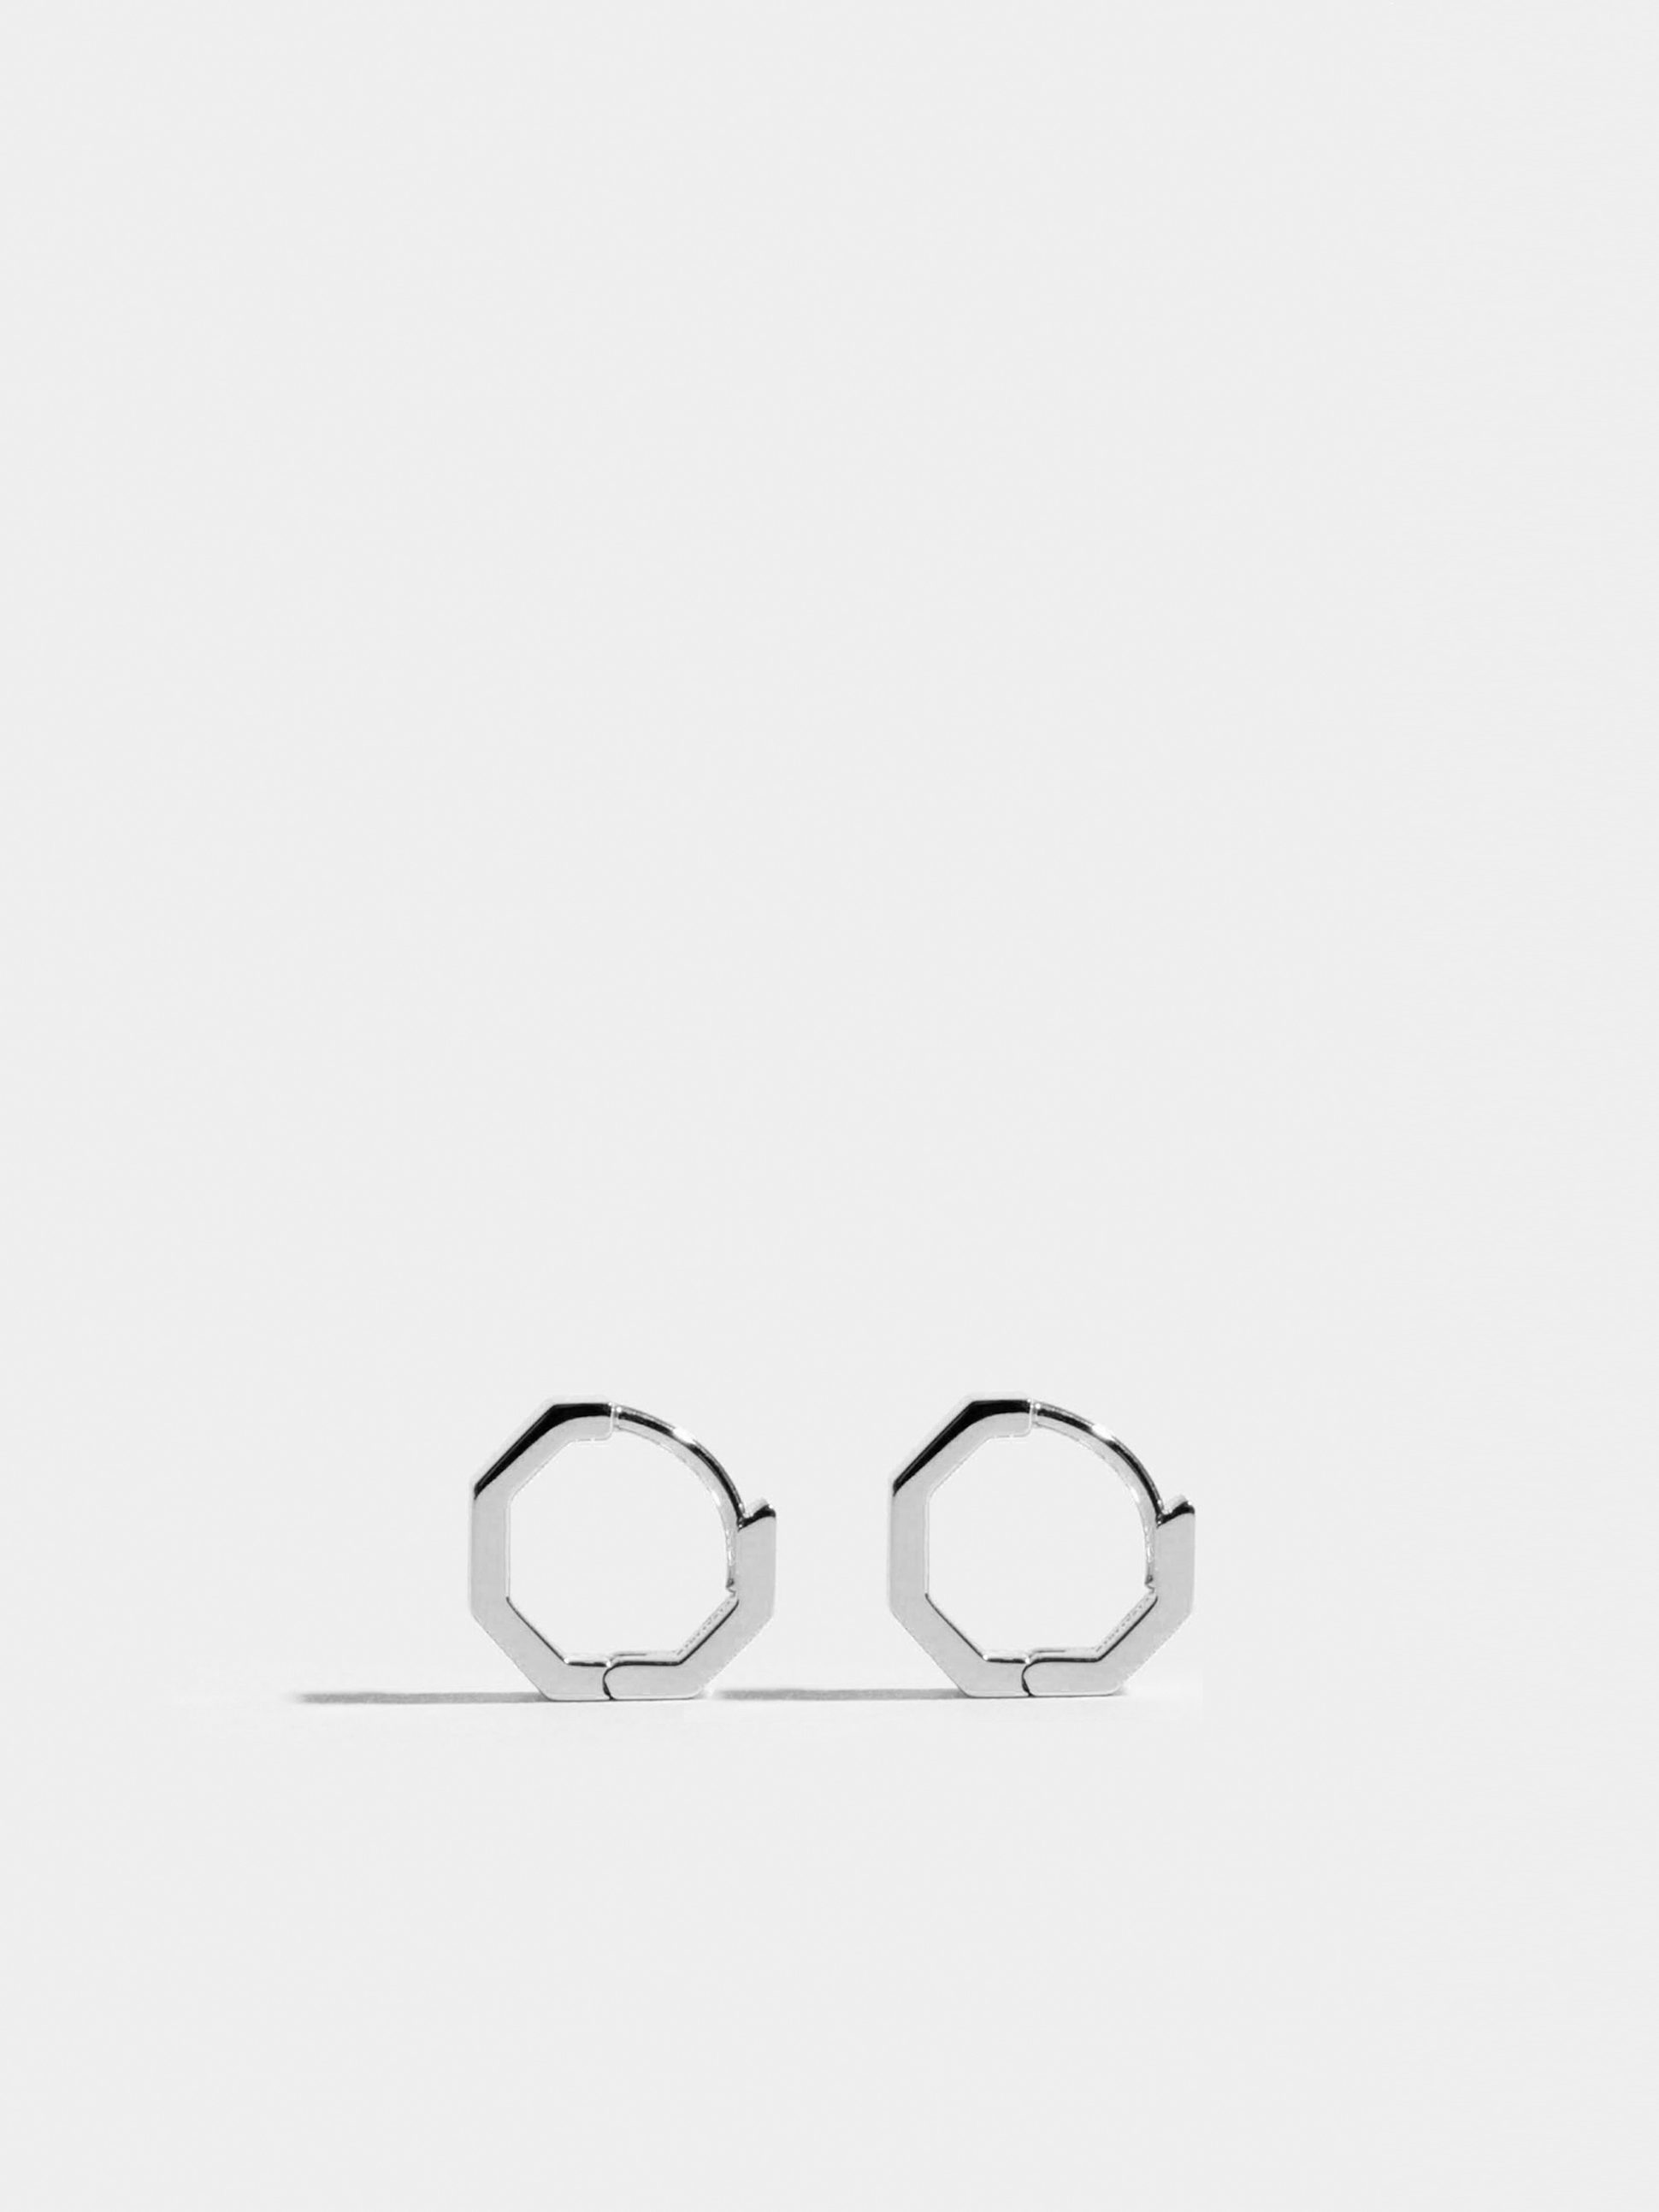 Octogone 10mm earrings in 18k Fairmined ethical white gold, the pair.